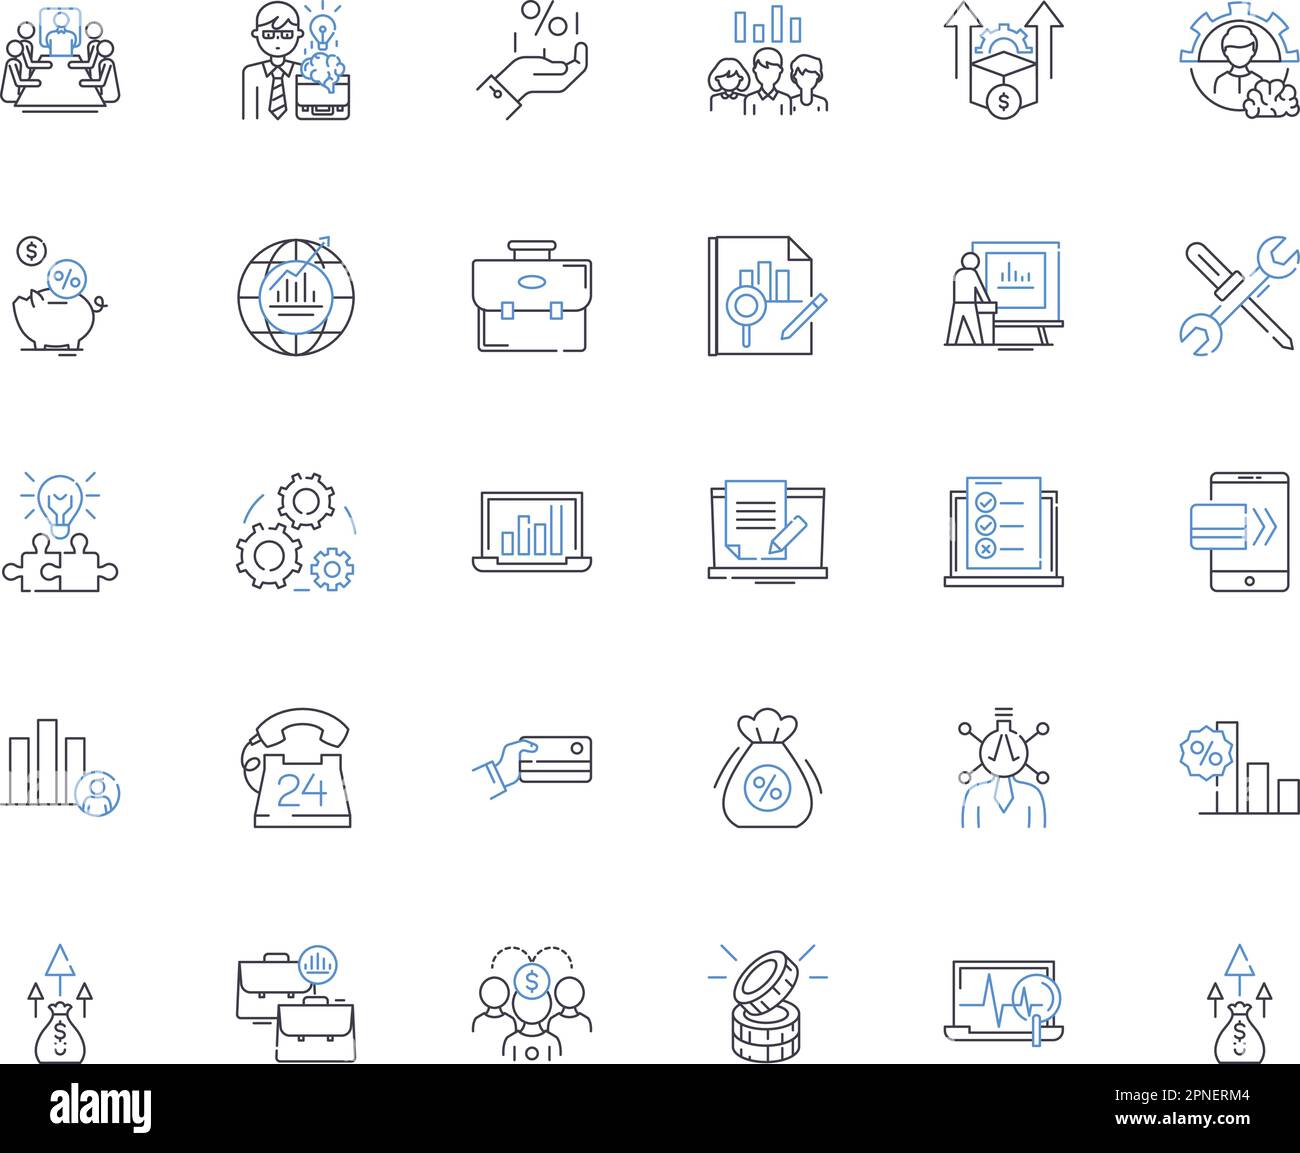 Bookkeeping line icons collection. Accounting, Ledger, Balance, Records, Invoicing, Expenses, Auditing vector and linear illustration. Financial Stock Vector